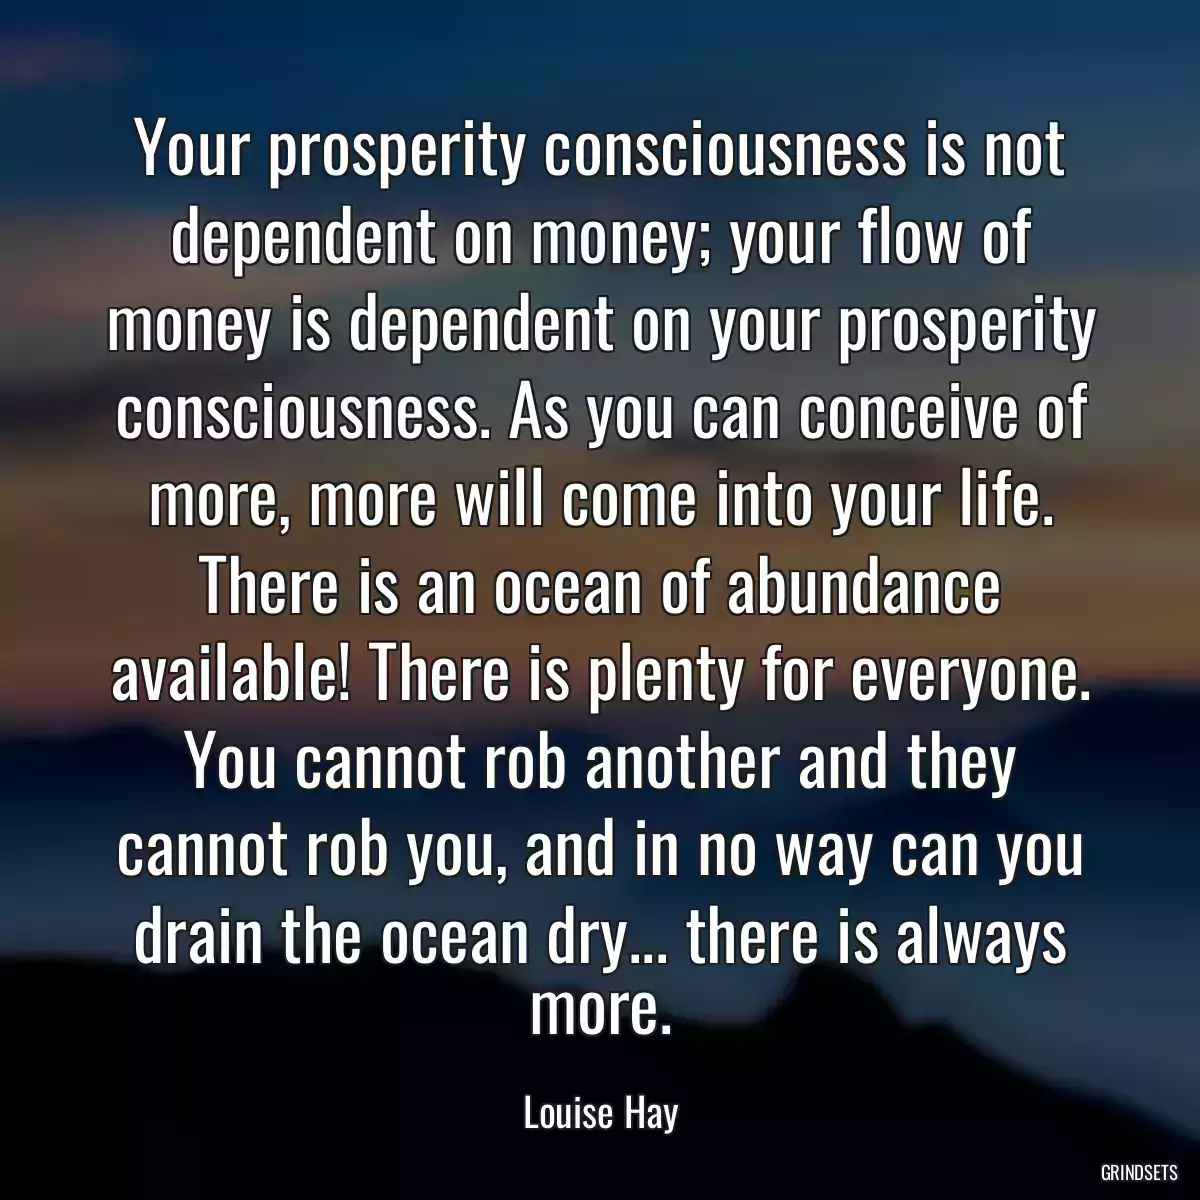 Your prosperity consciousness is not dependent on money; your flow of money is dependent on your prosperity consciousness. As you can conceive of more, more will come into your life. There is an ocean of abundance available! There is plenty for everyone. You cannot rob another and they cannot rob you, and in no way can you drain the ocean dry... there is always more.